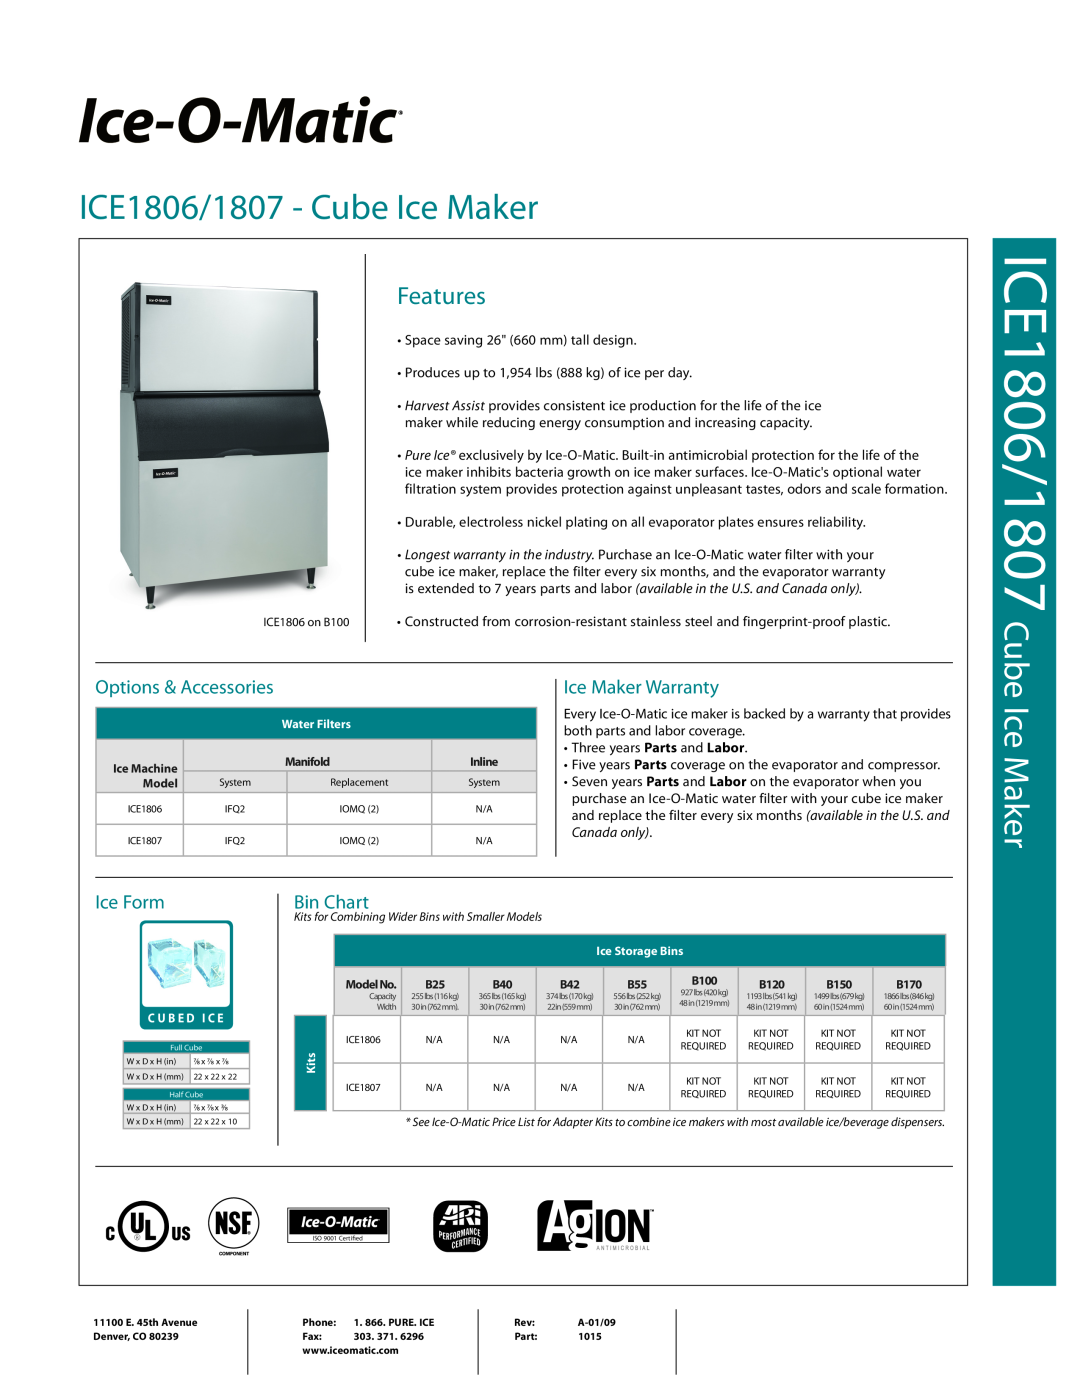 Ice-O-Matic warranty Options & Accessories, Ice Maker Warranty, Ice Form, Bin Chart, ICE1806/1807 Cube, Features 